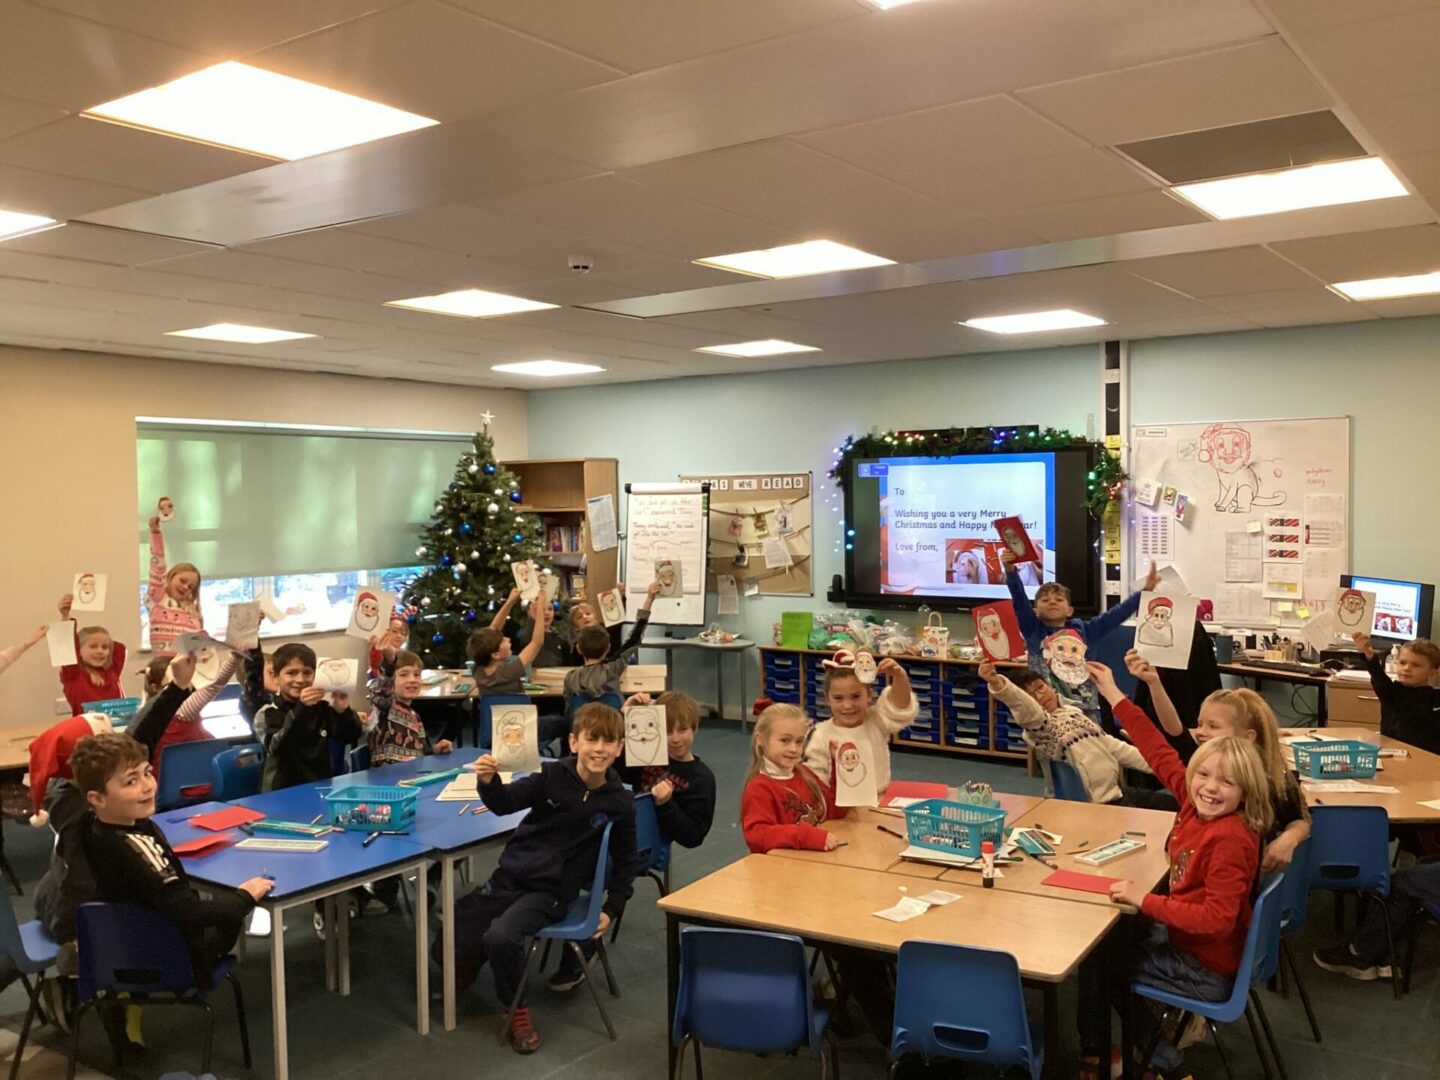 Year 4 show off their Christmas cards